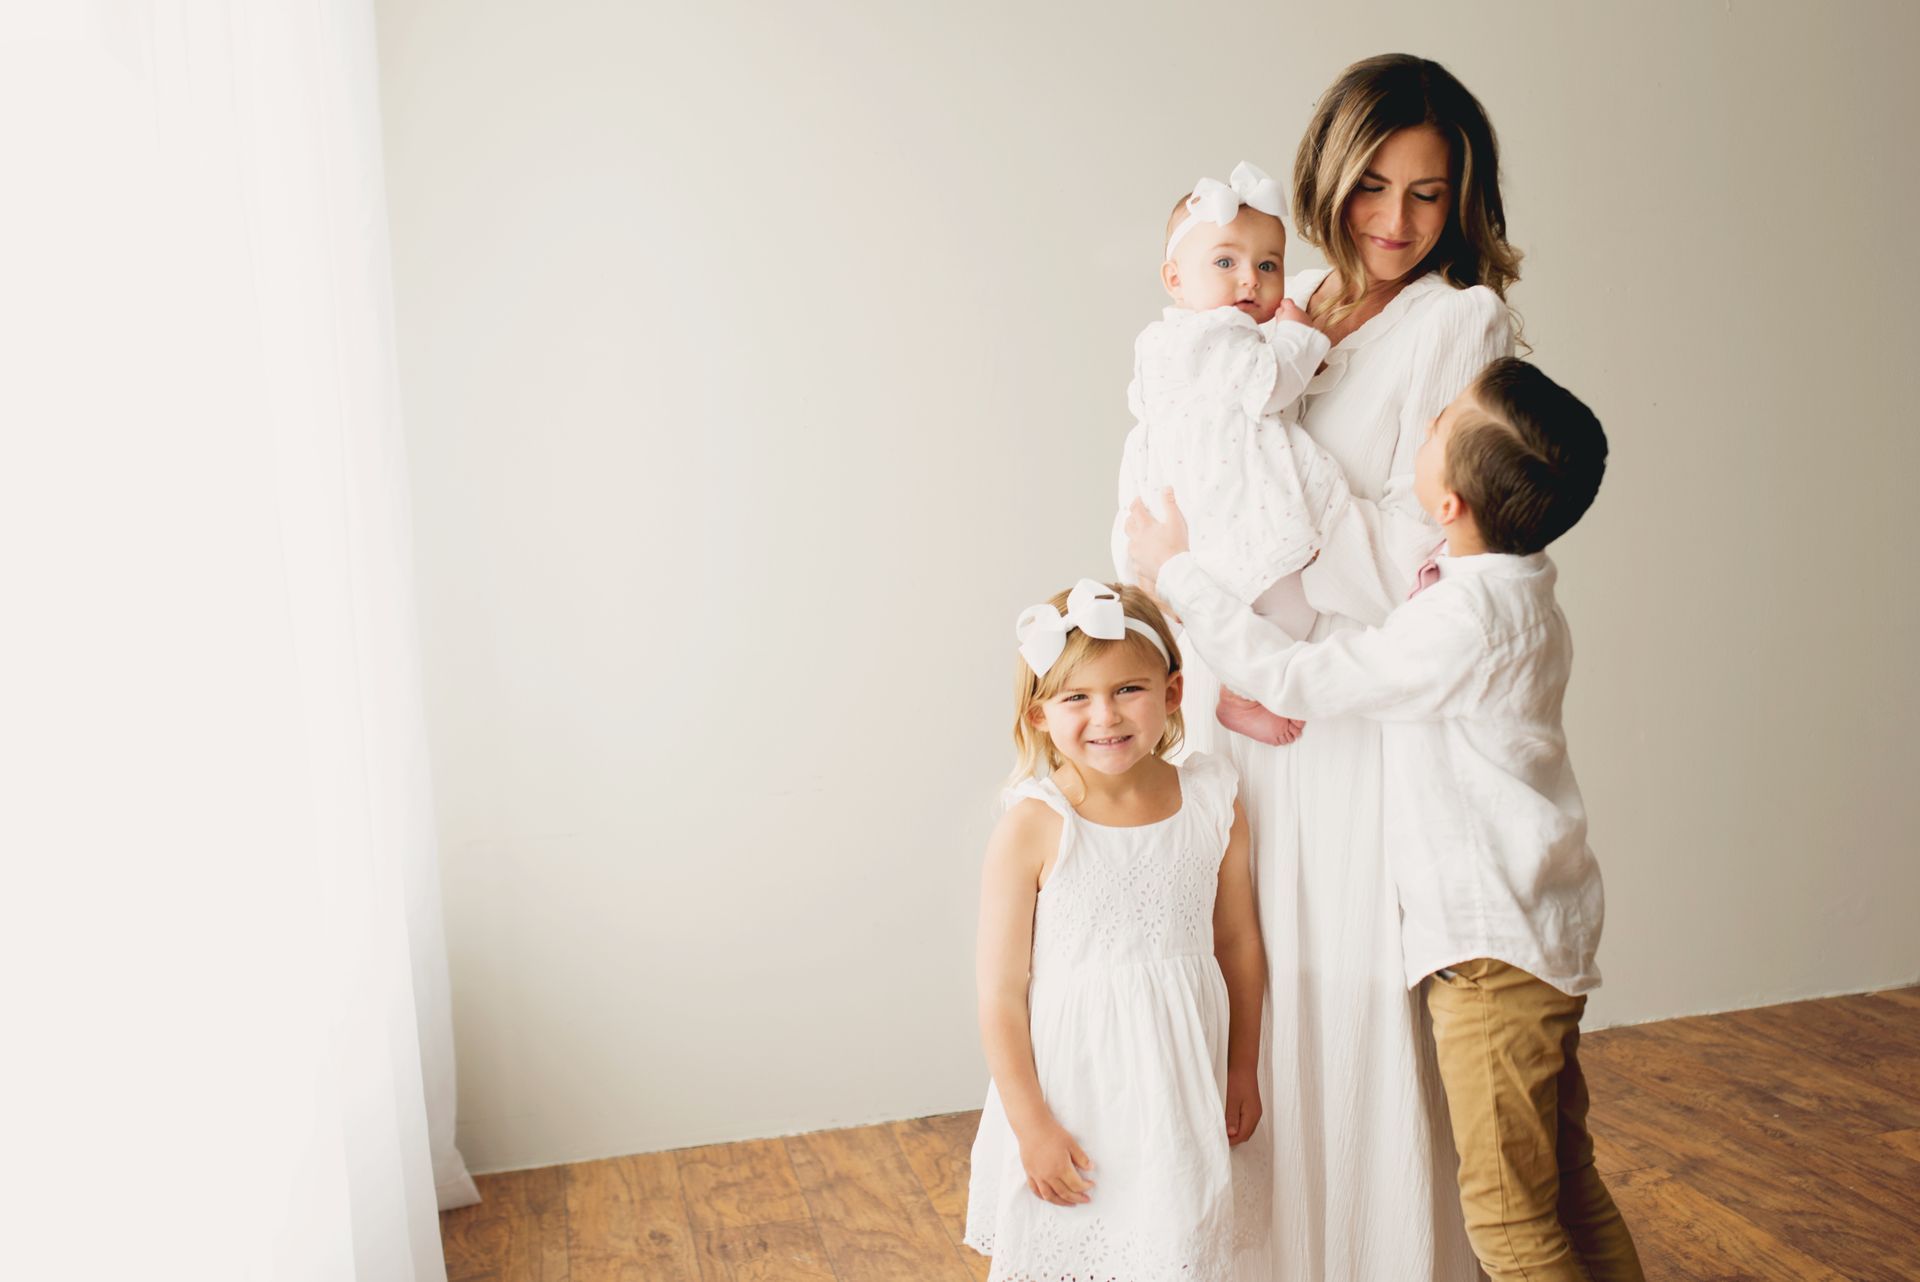 Health coach Dr. Kimberly and her three children all wearing white.